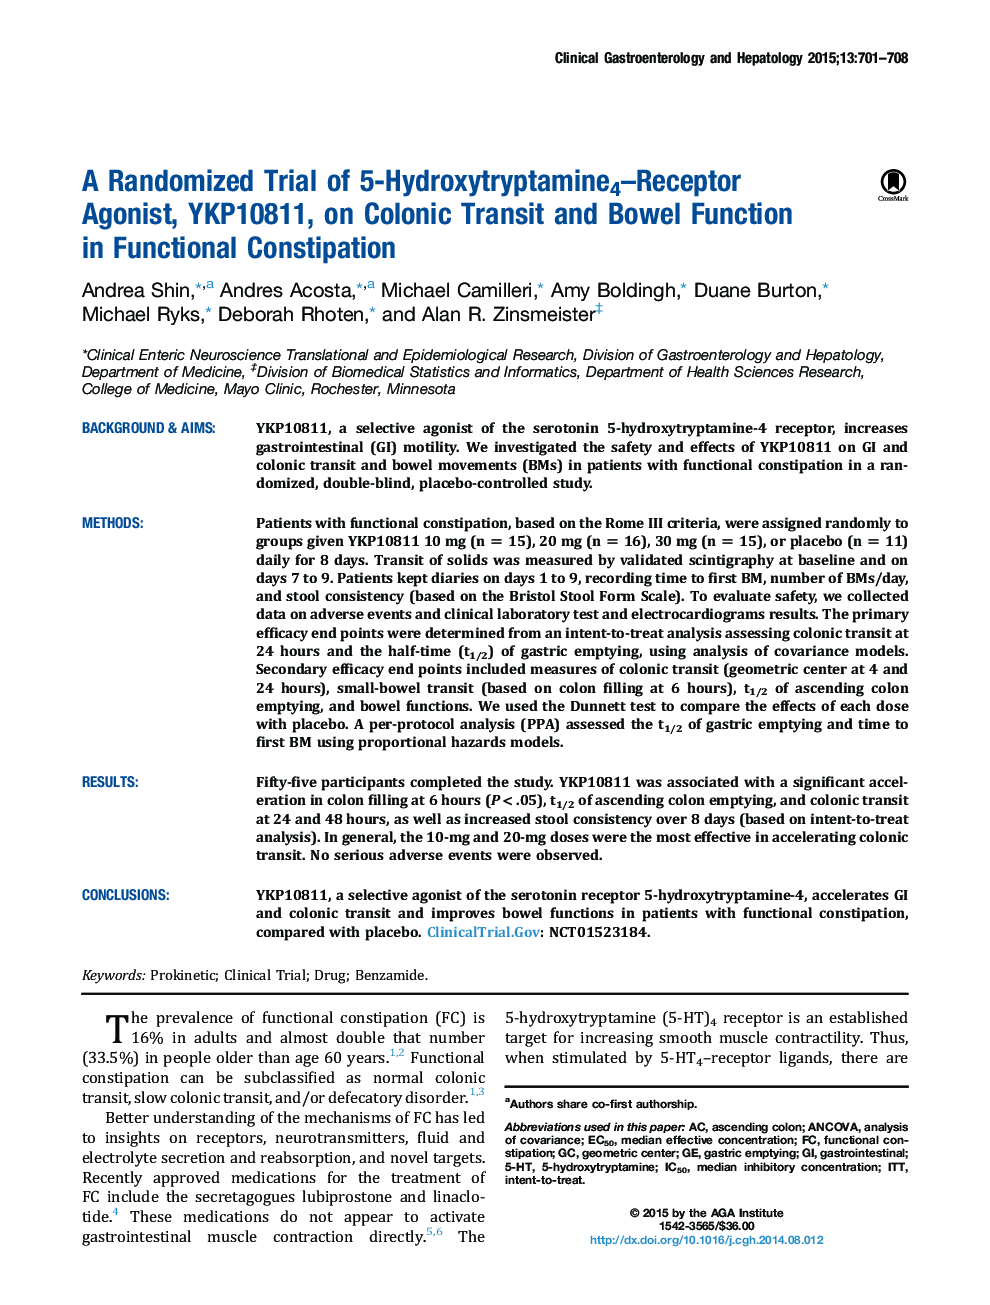 A Randomized Trial of 5-Hydroxytryptamine4-Receptor Agonist, YKP10811, on Colonic Transit and Bowel Function in Functional Constipation